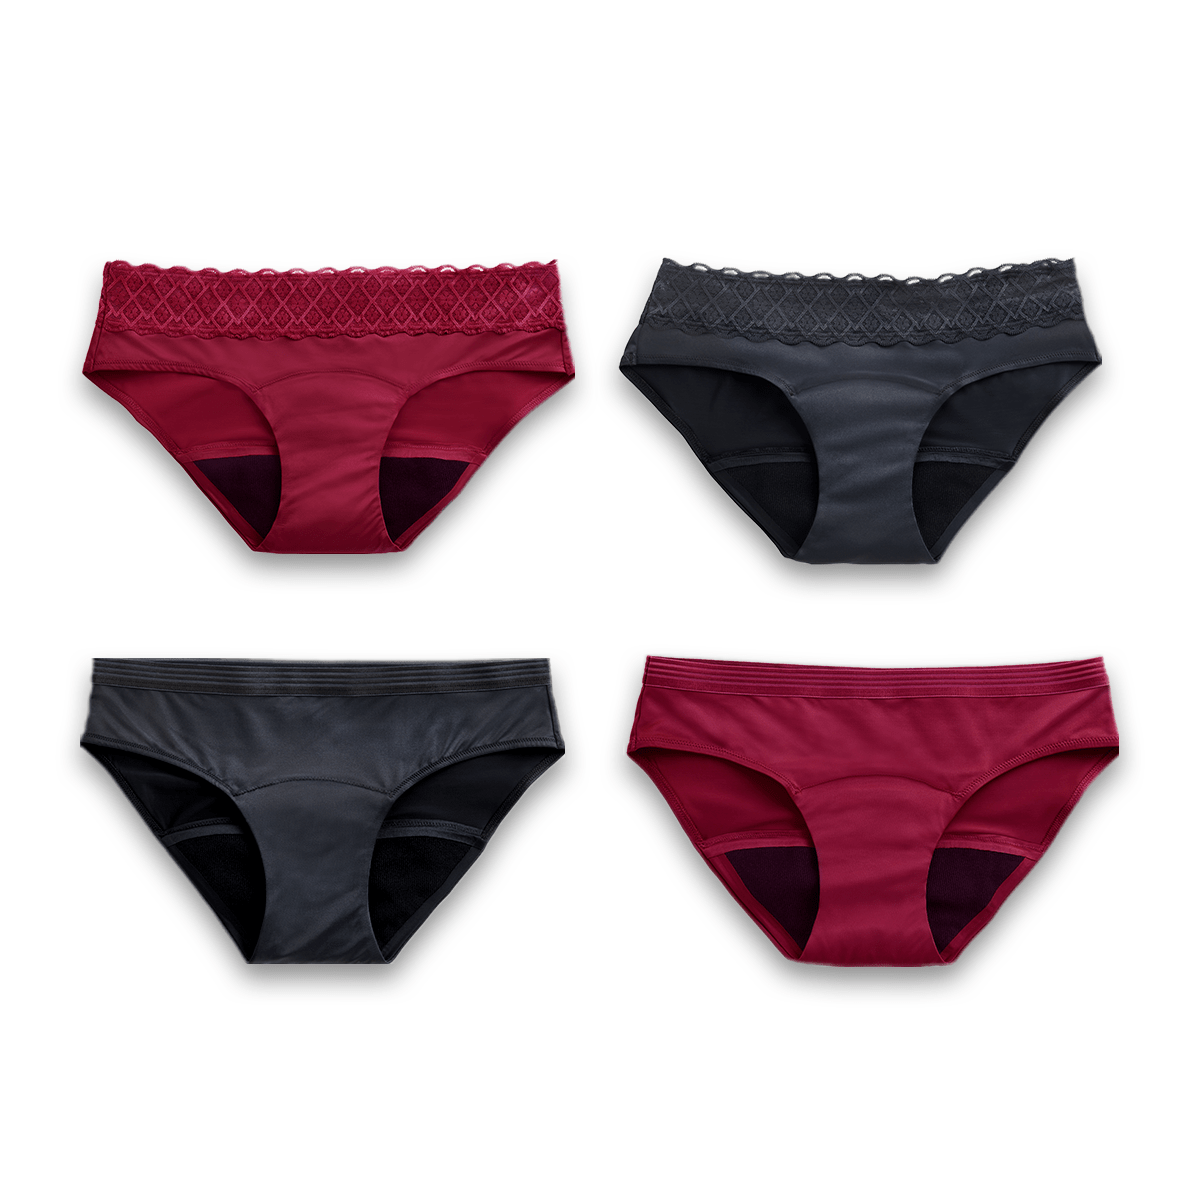 Imagen Inactiva Combo Hipster Negro + Hipster Vinotinto + Bikini Vinotinto + Bikini Negro - Flujo Regular 5